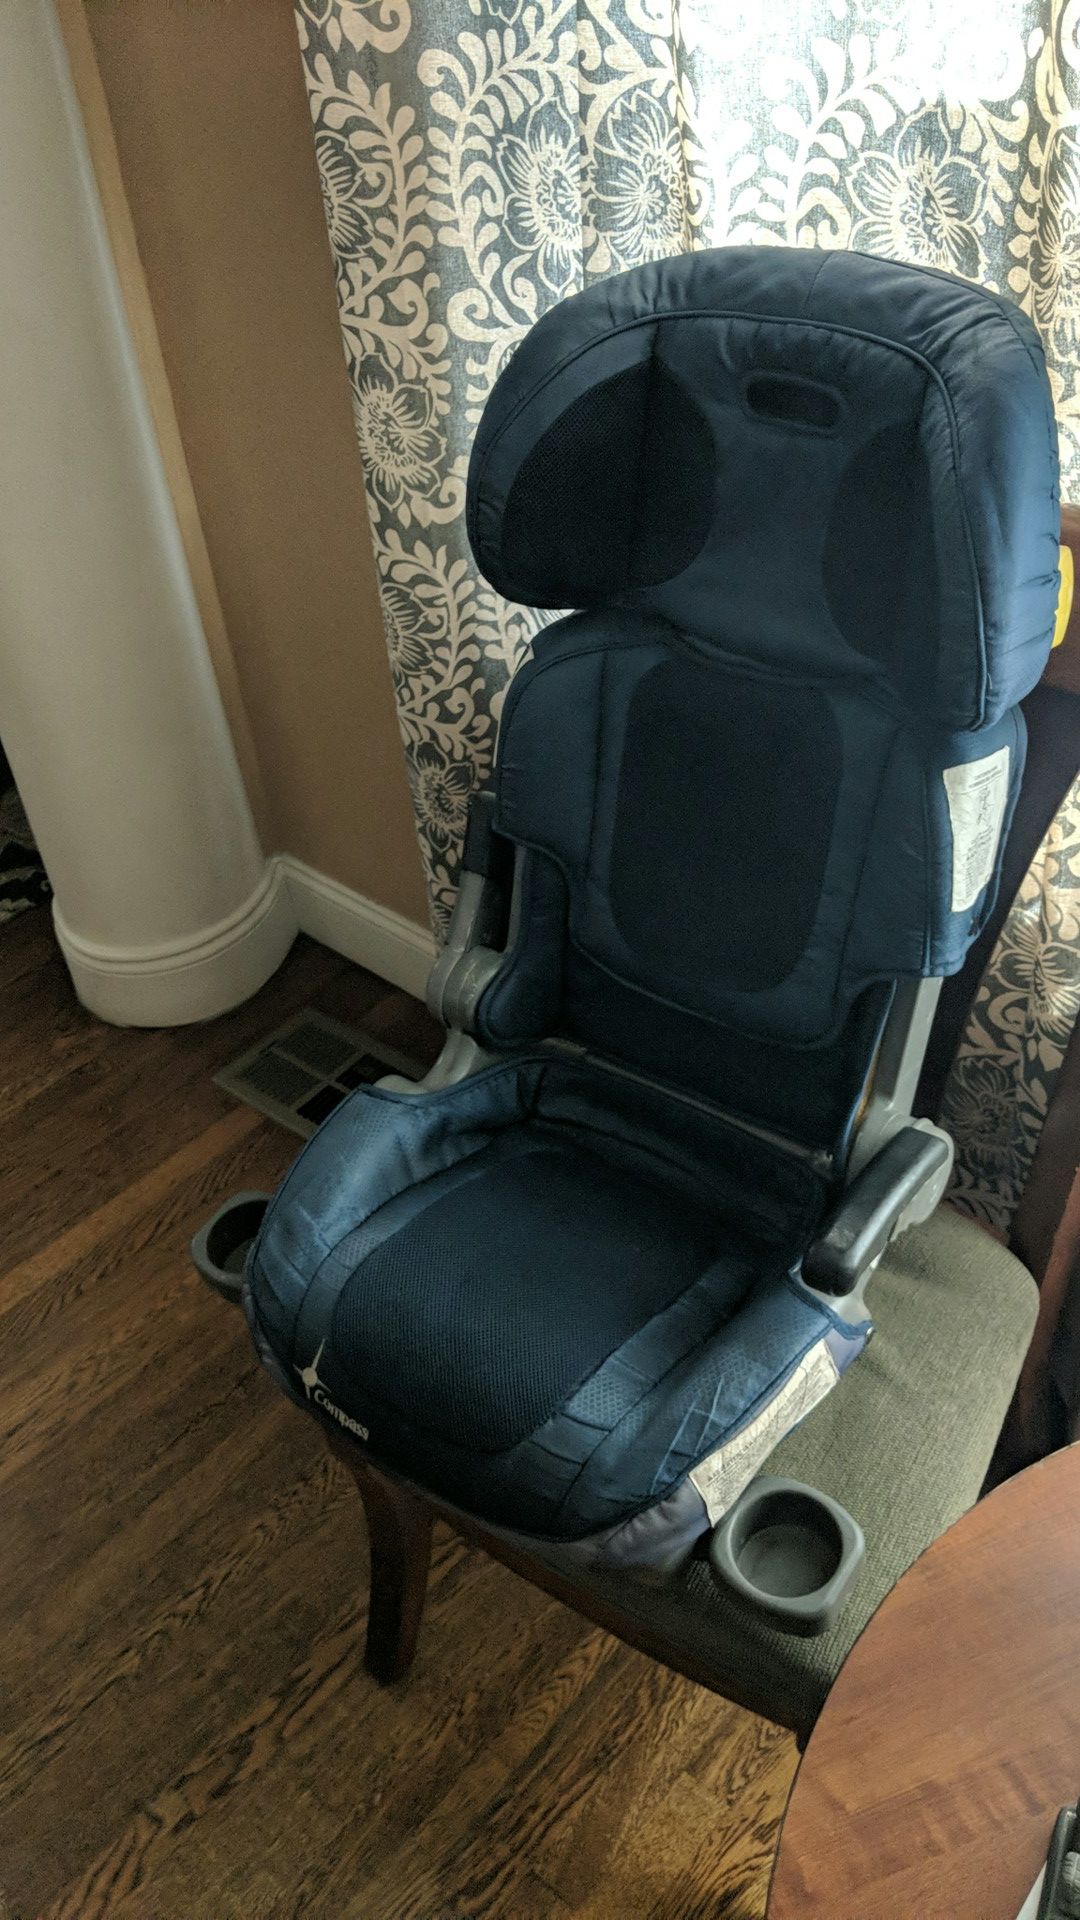 Booster seat with high back adjustable head rest